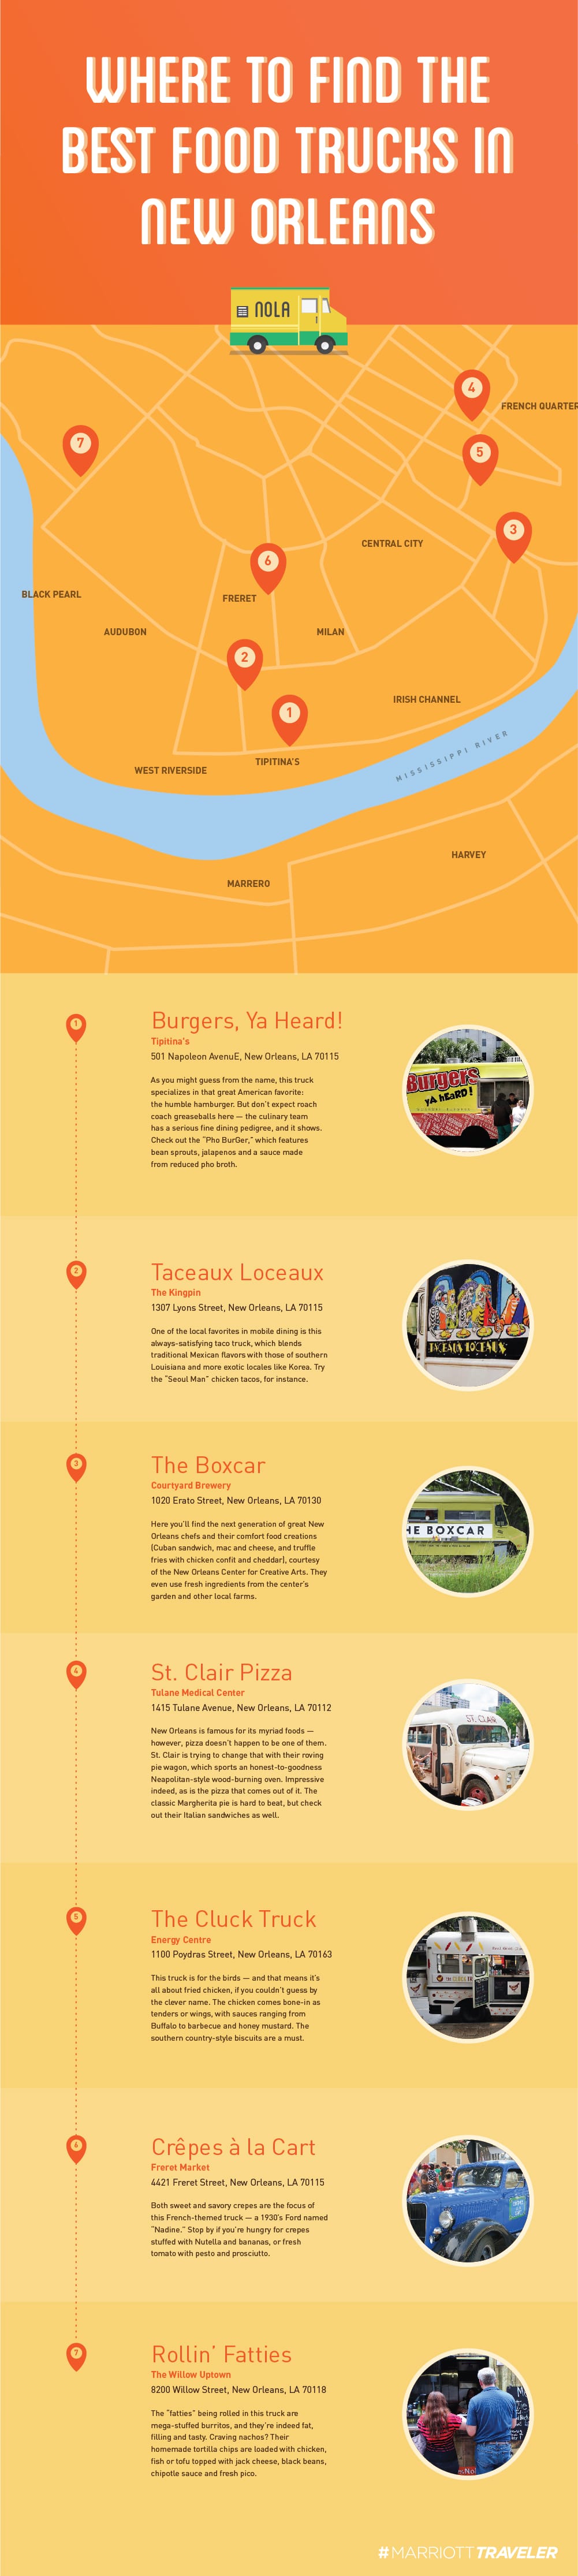 food-trucks-new-orleans-infographic-002